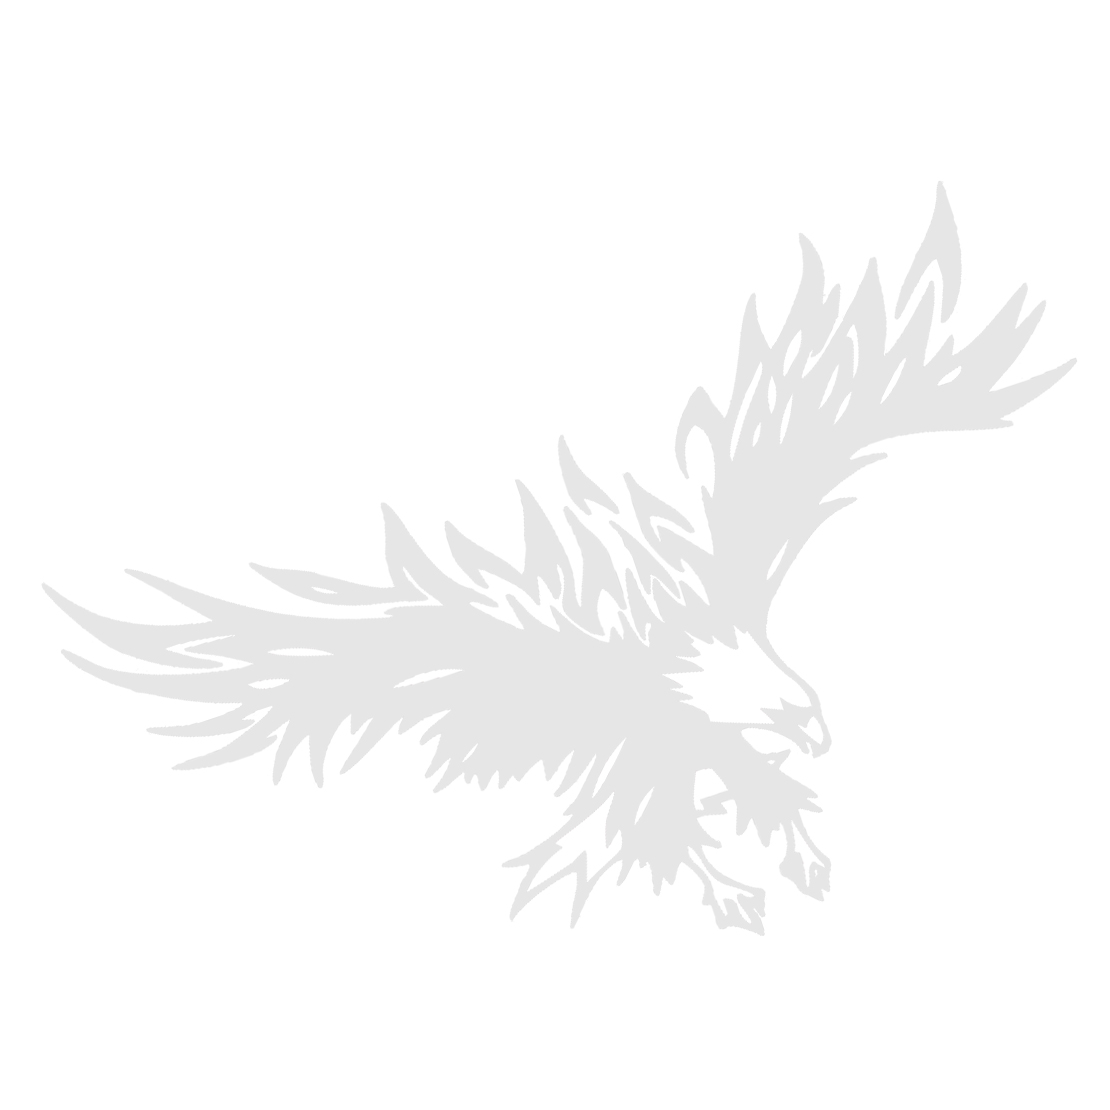 Car Hood Stickers - Eagle Car Decals - Truck Decals - Racing Decoration  Flying Wings Eagle Pattern Car Hood Decal Truck SUV Body